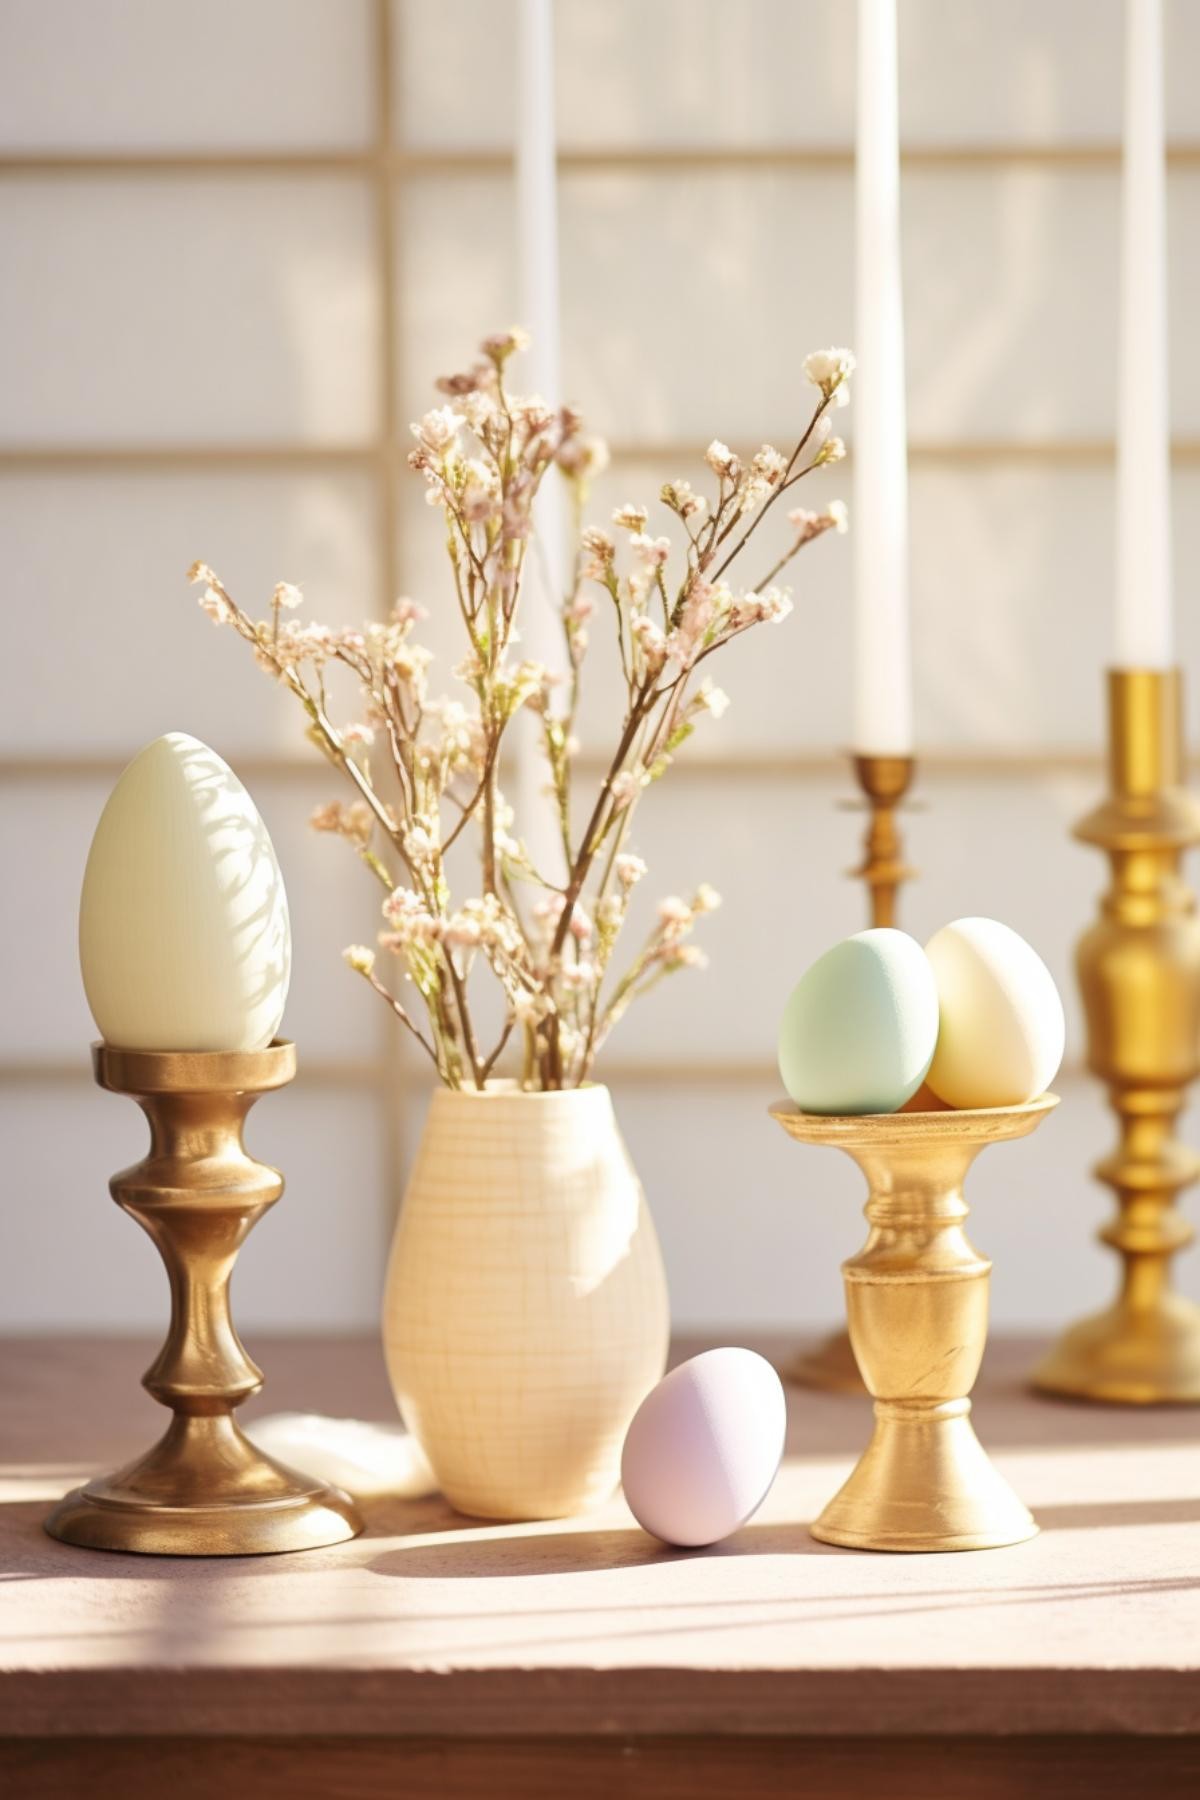 Pastel Eggs and White Flowers